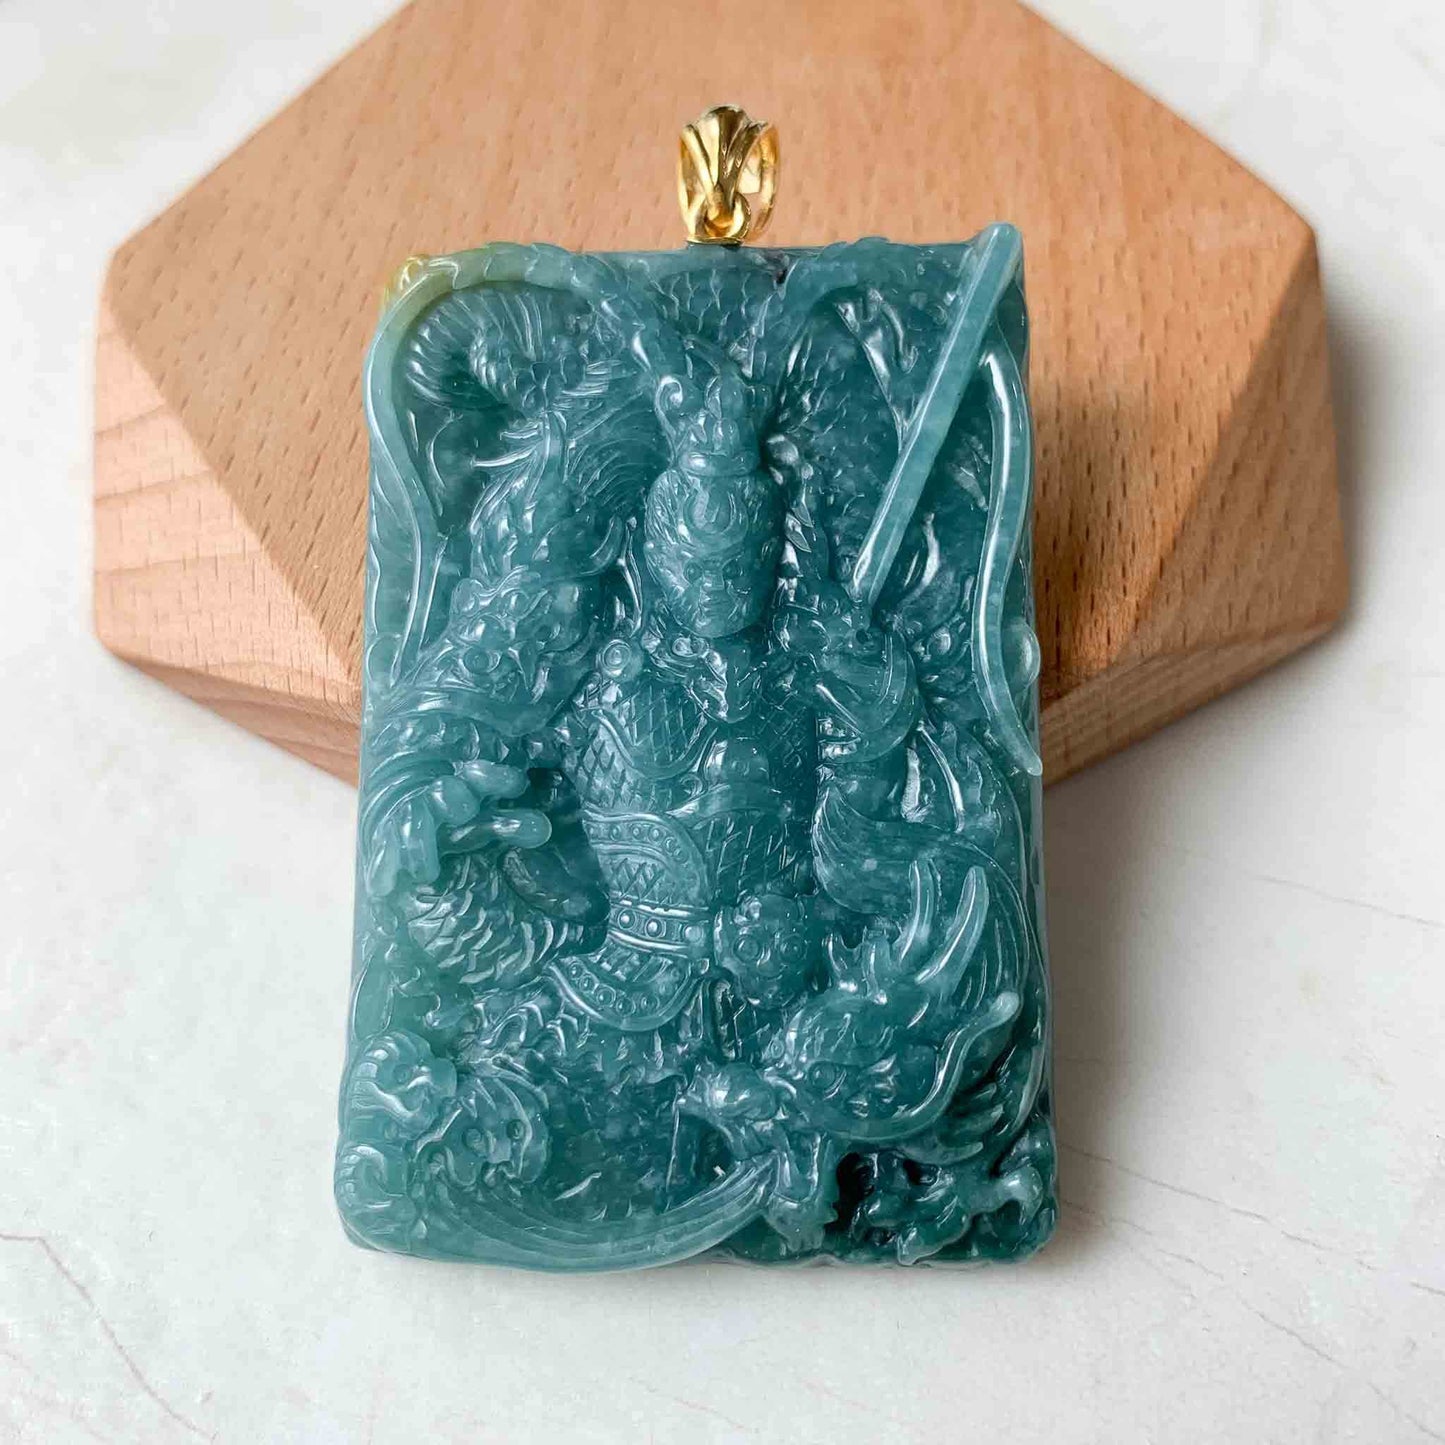 Blue Green Jadeite Jade Monkey King with 18K Gold Pendant, Sun Wu Kong, 孙悟空, Front Side Carving, Chinese Zodiac Carved, XZG-0423-1690338745